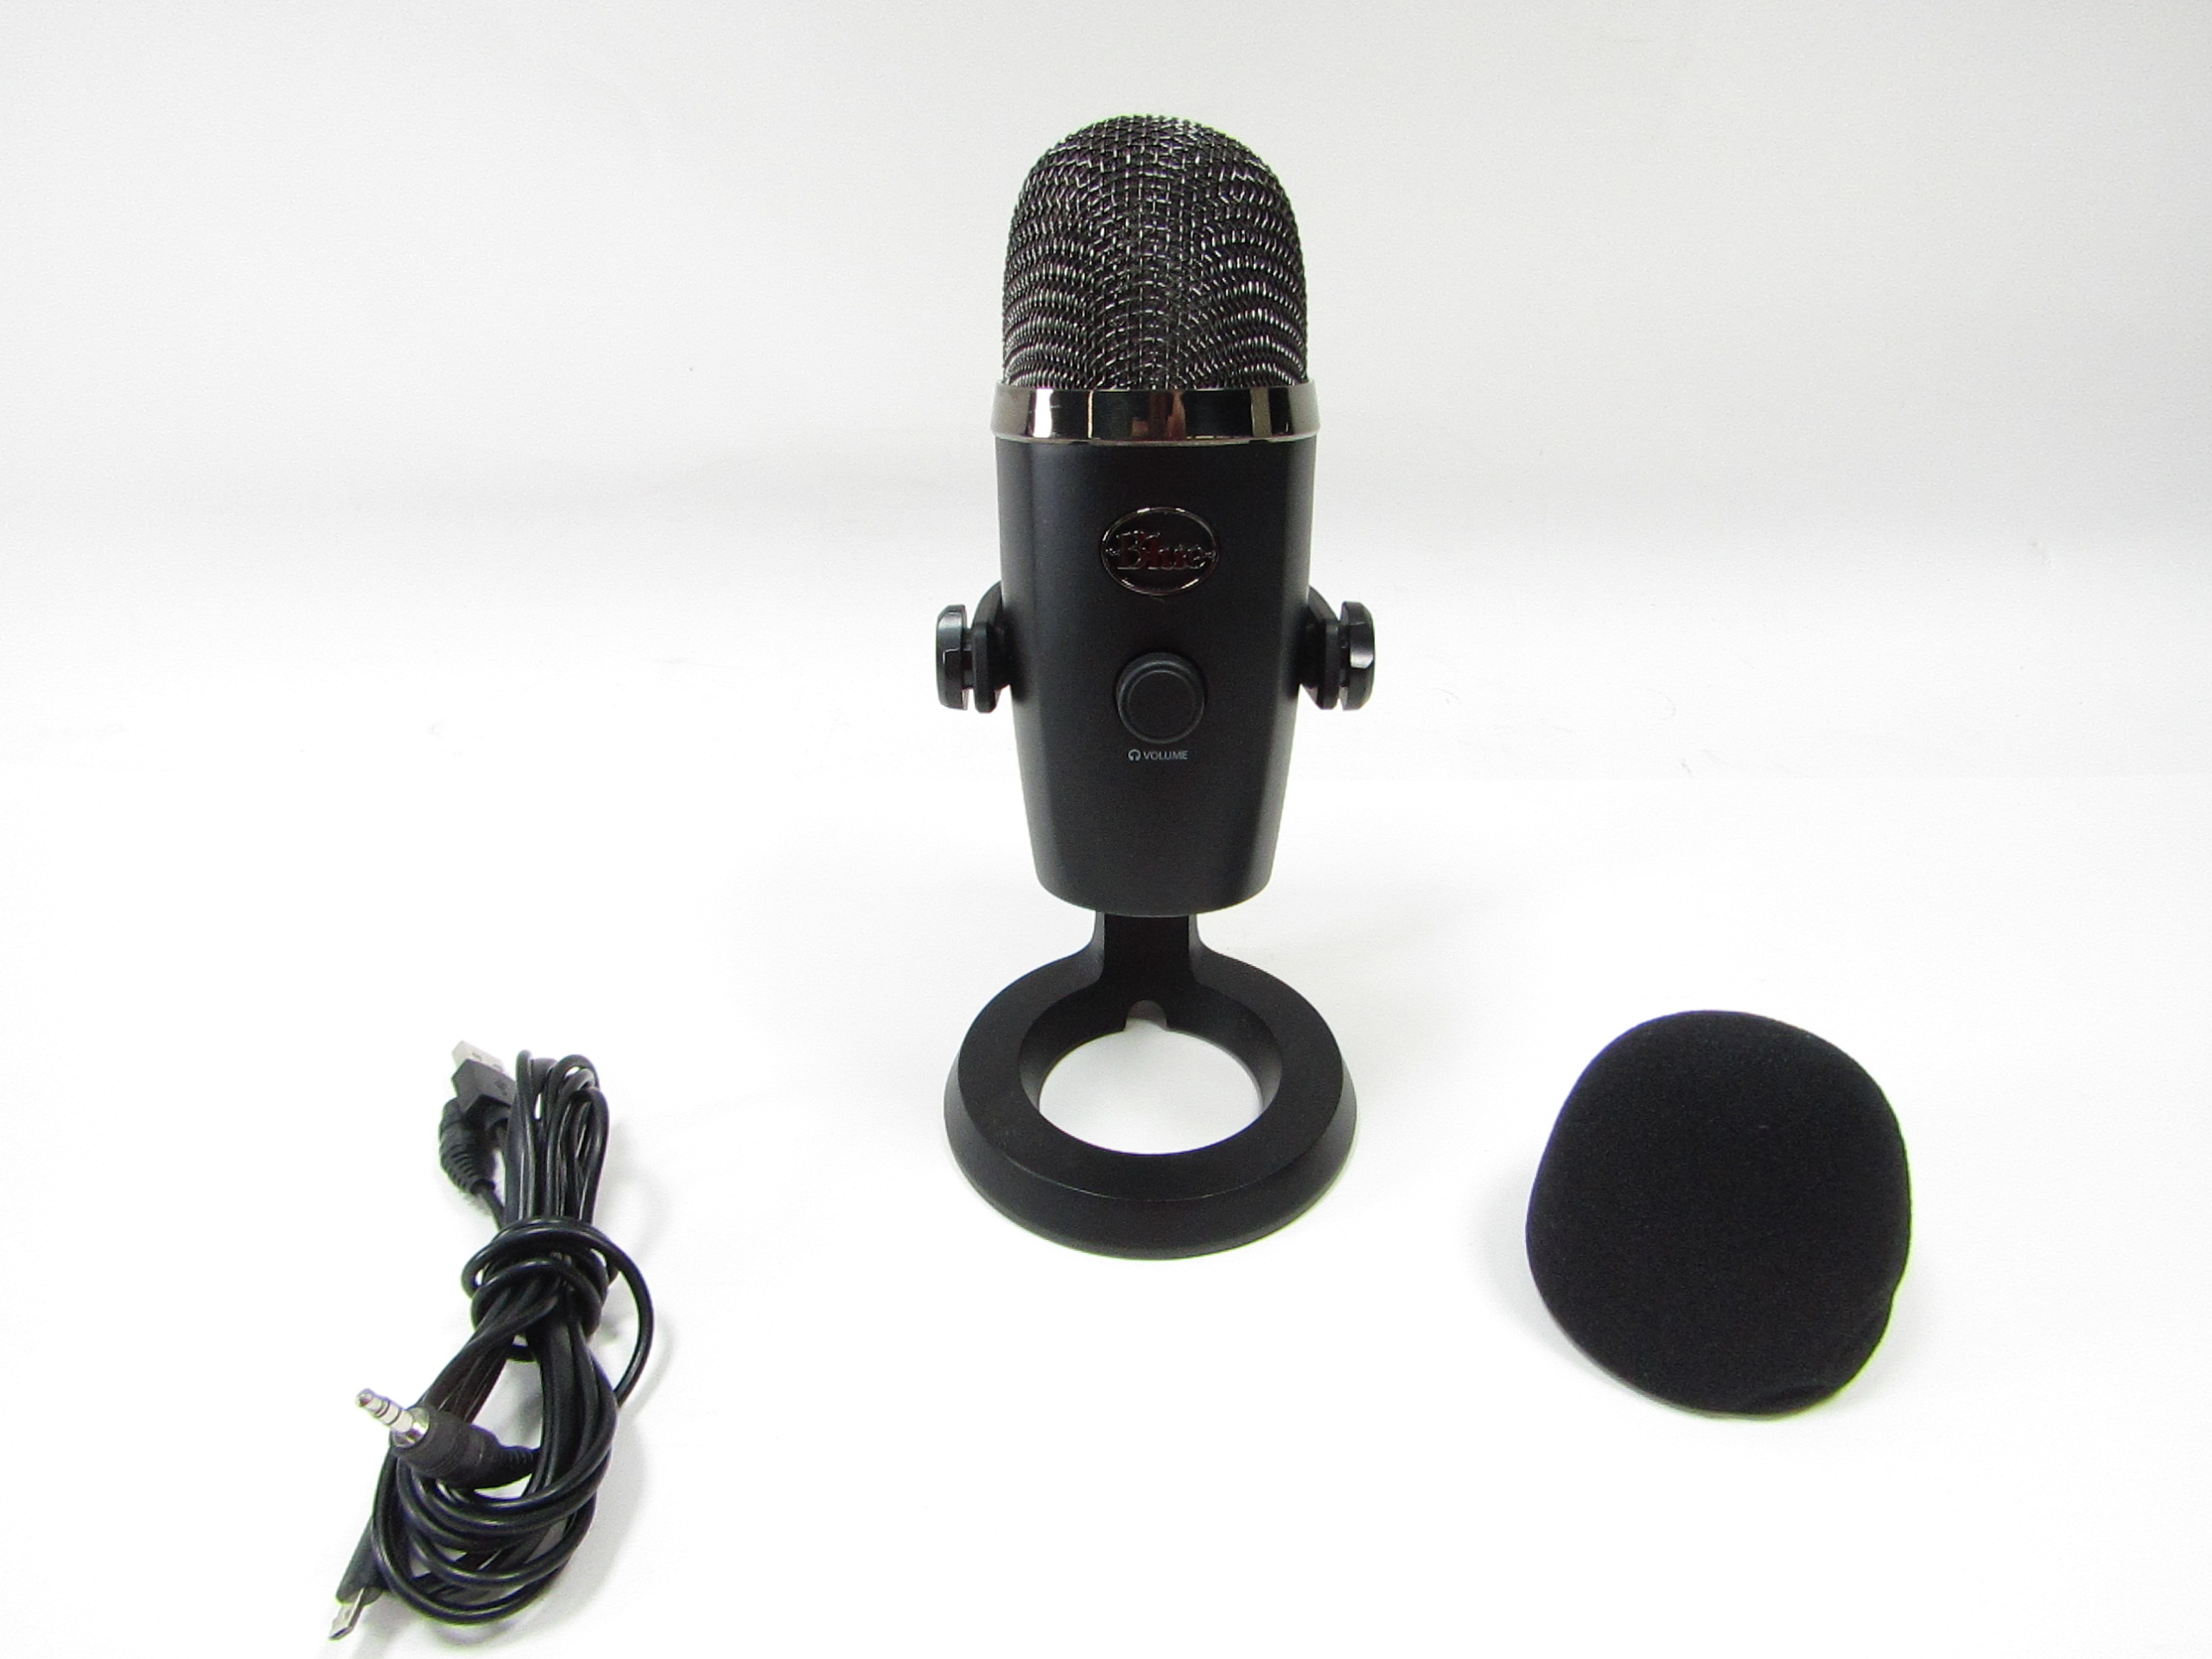 Blue Microphones Yeti specifications